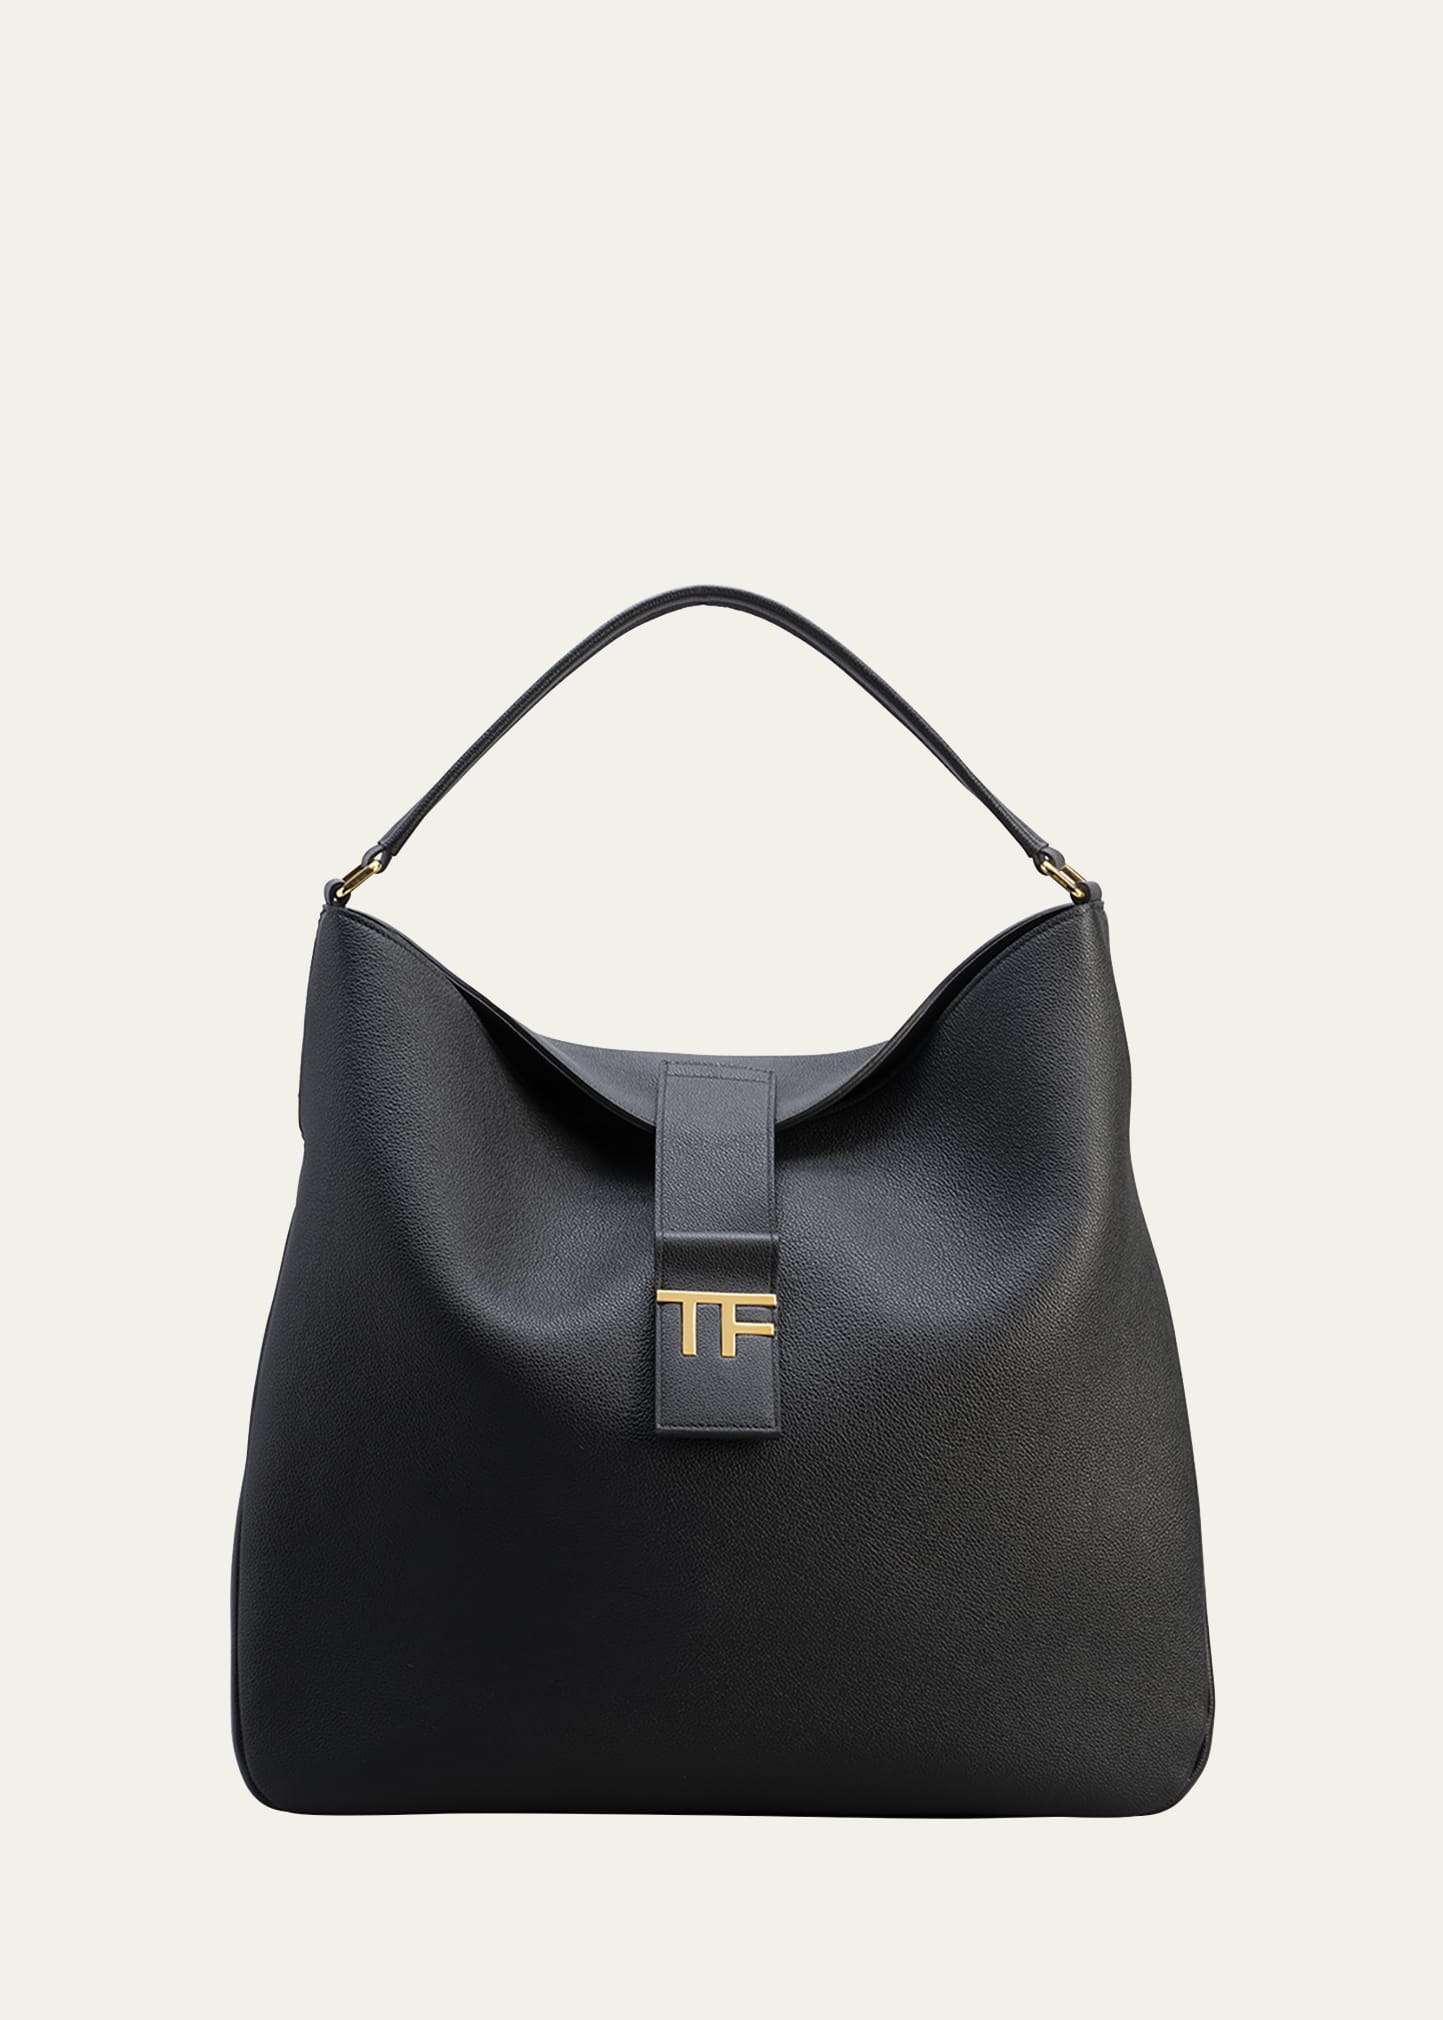 TOM FORD TF MEDIUM HOBO IN GRAINED LEATHER